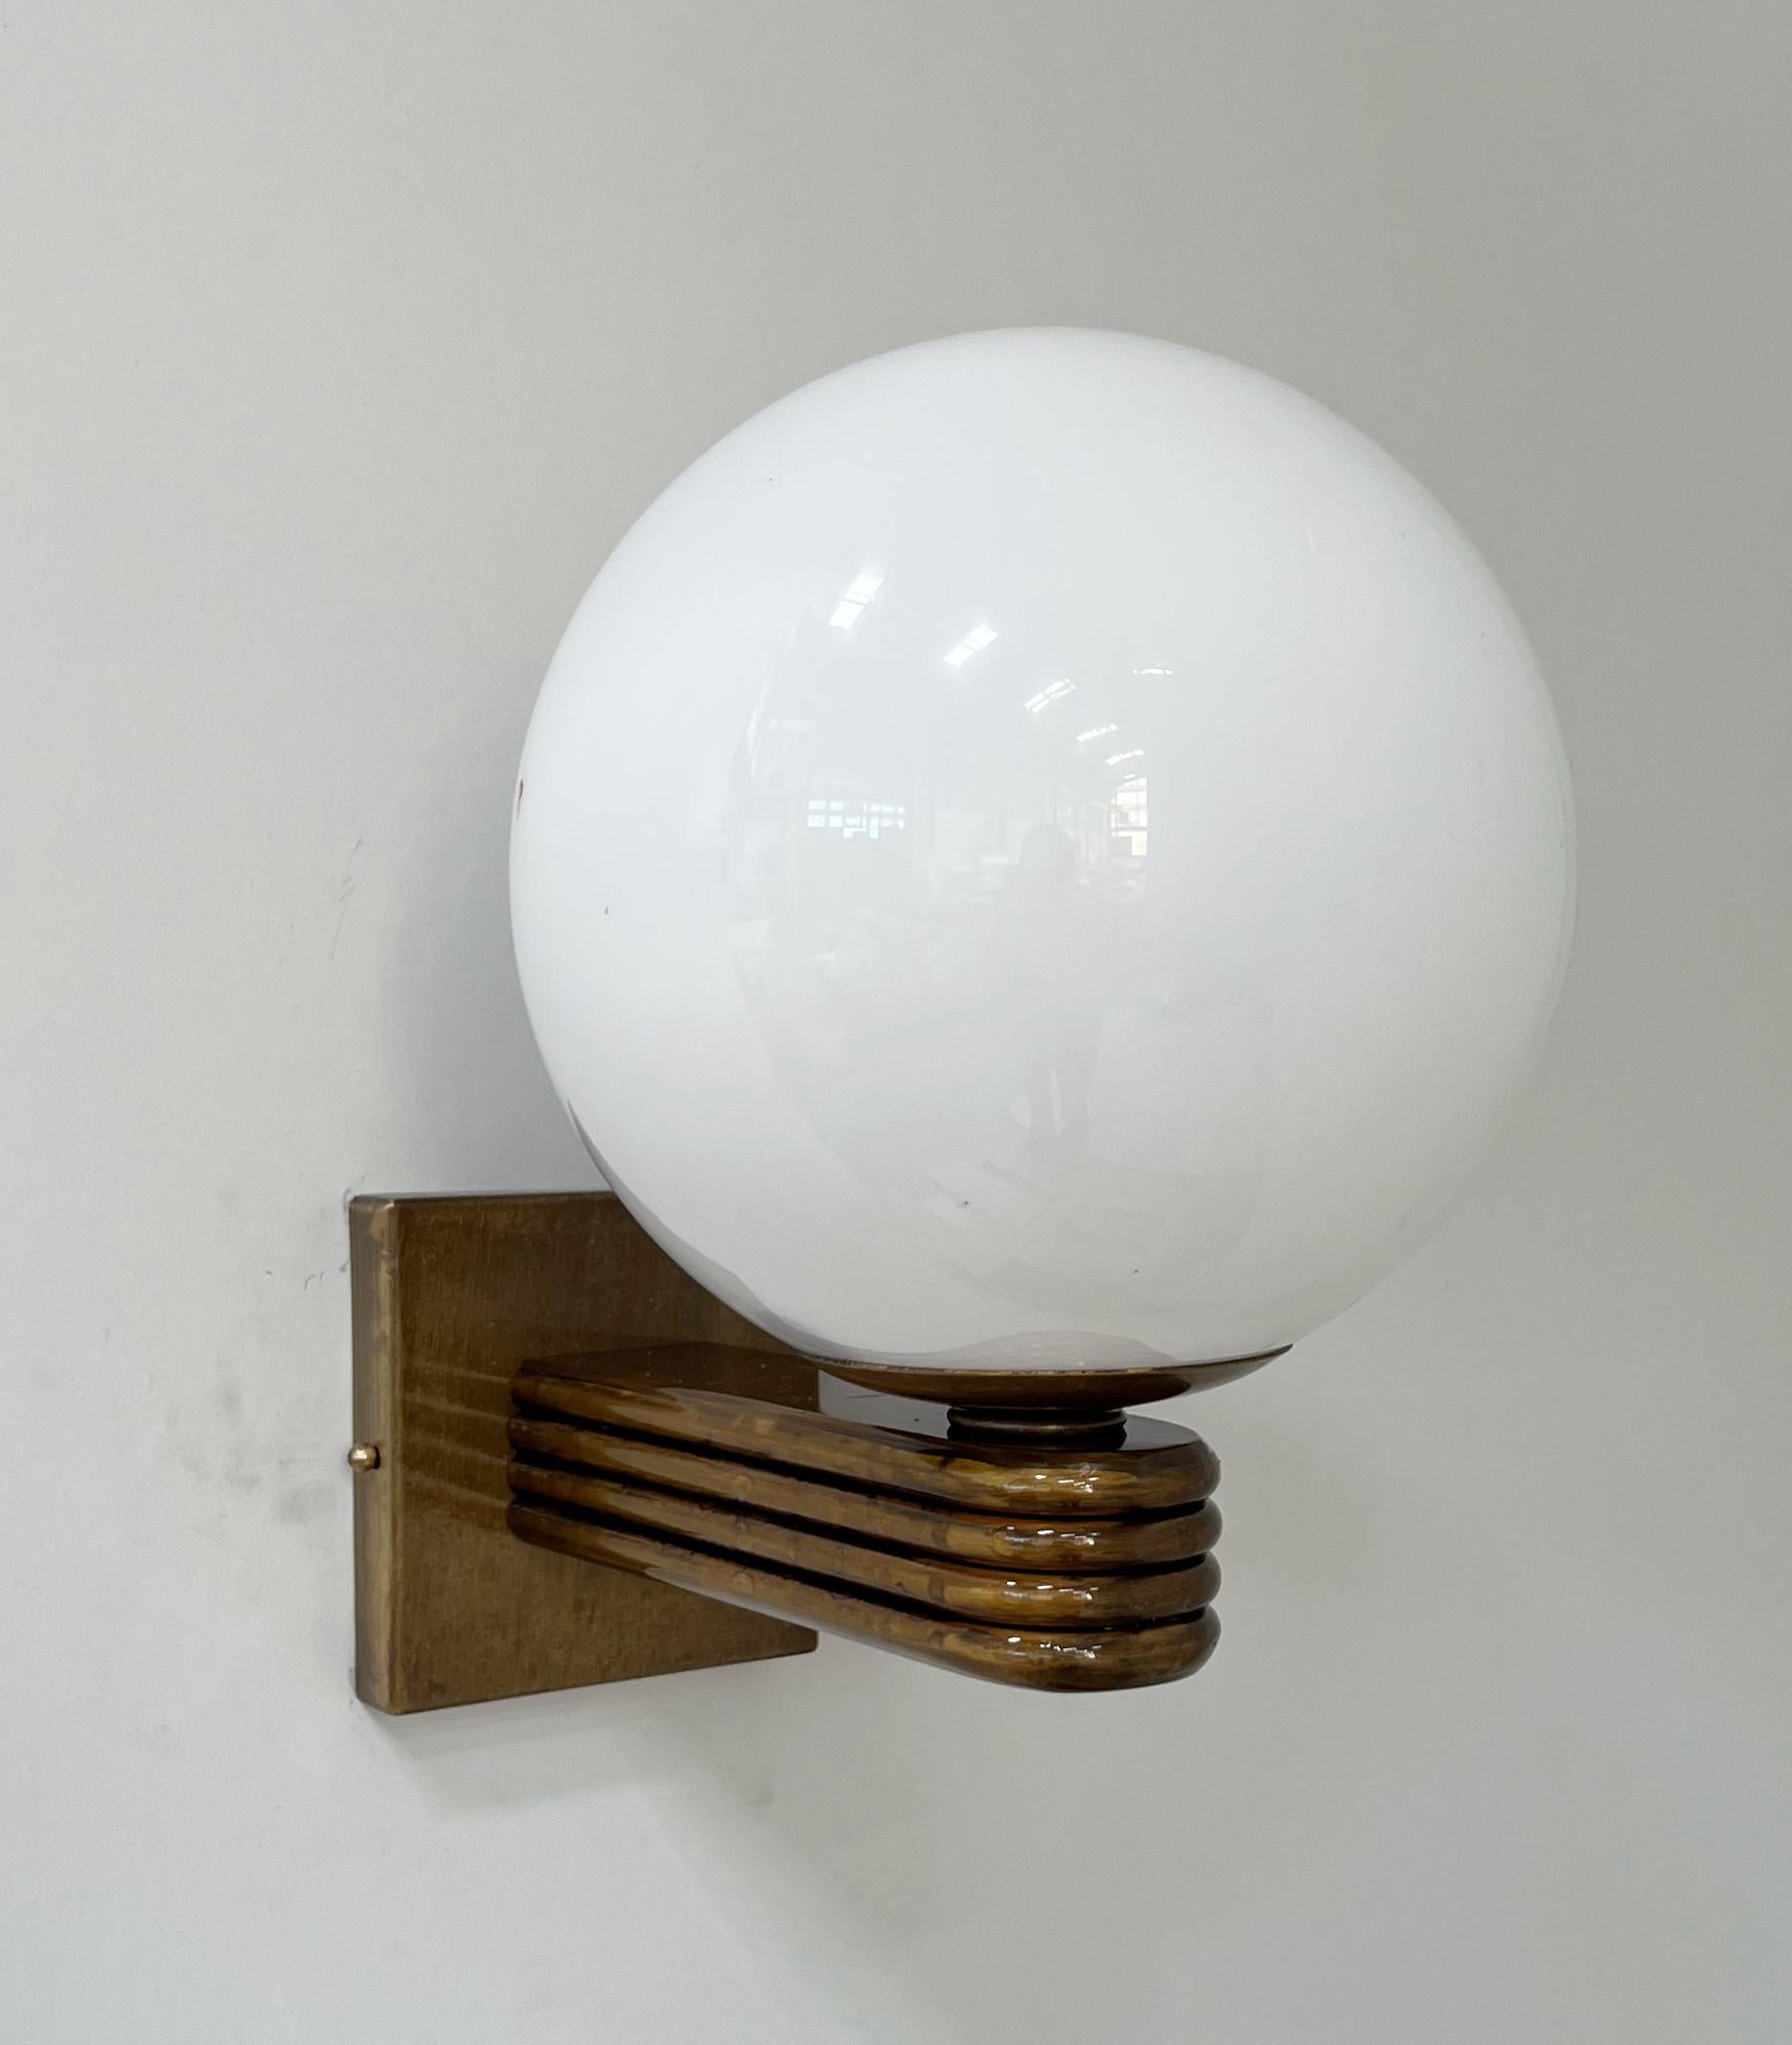 Italian Art Deco style wall light with glossy white Murano glass globe mounted on bronzed finish frame, designed by Fabio Bergomi for Fabio Ltd, made in Italy
1 light / E12 or E14 type / max 40W
Measures: Height 12 inches, width 8 inches, depth 10